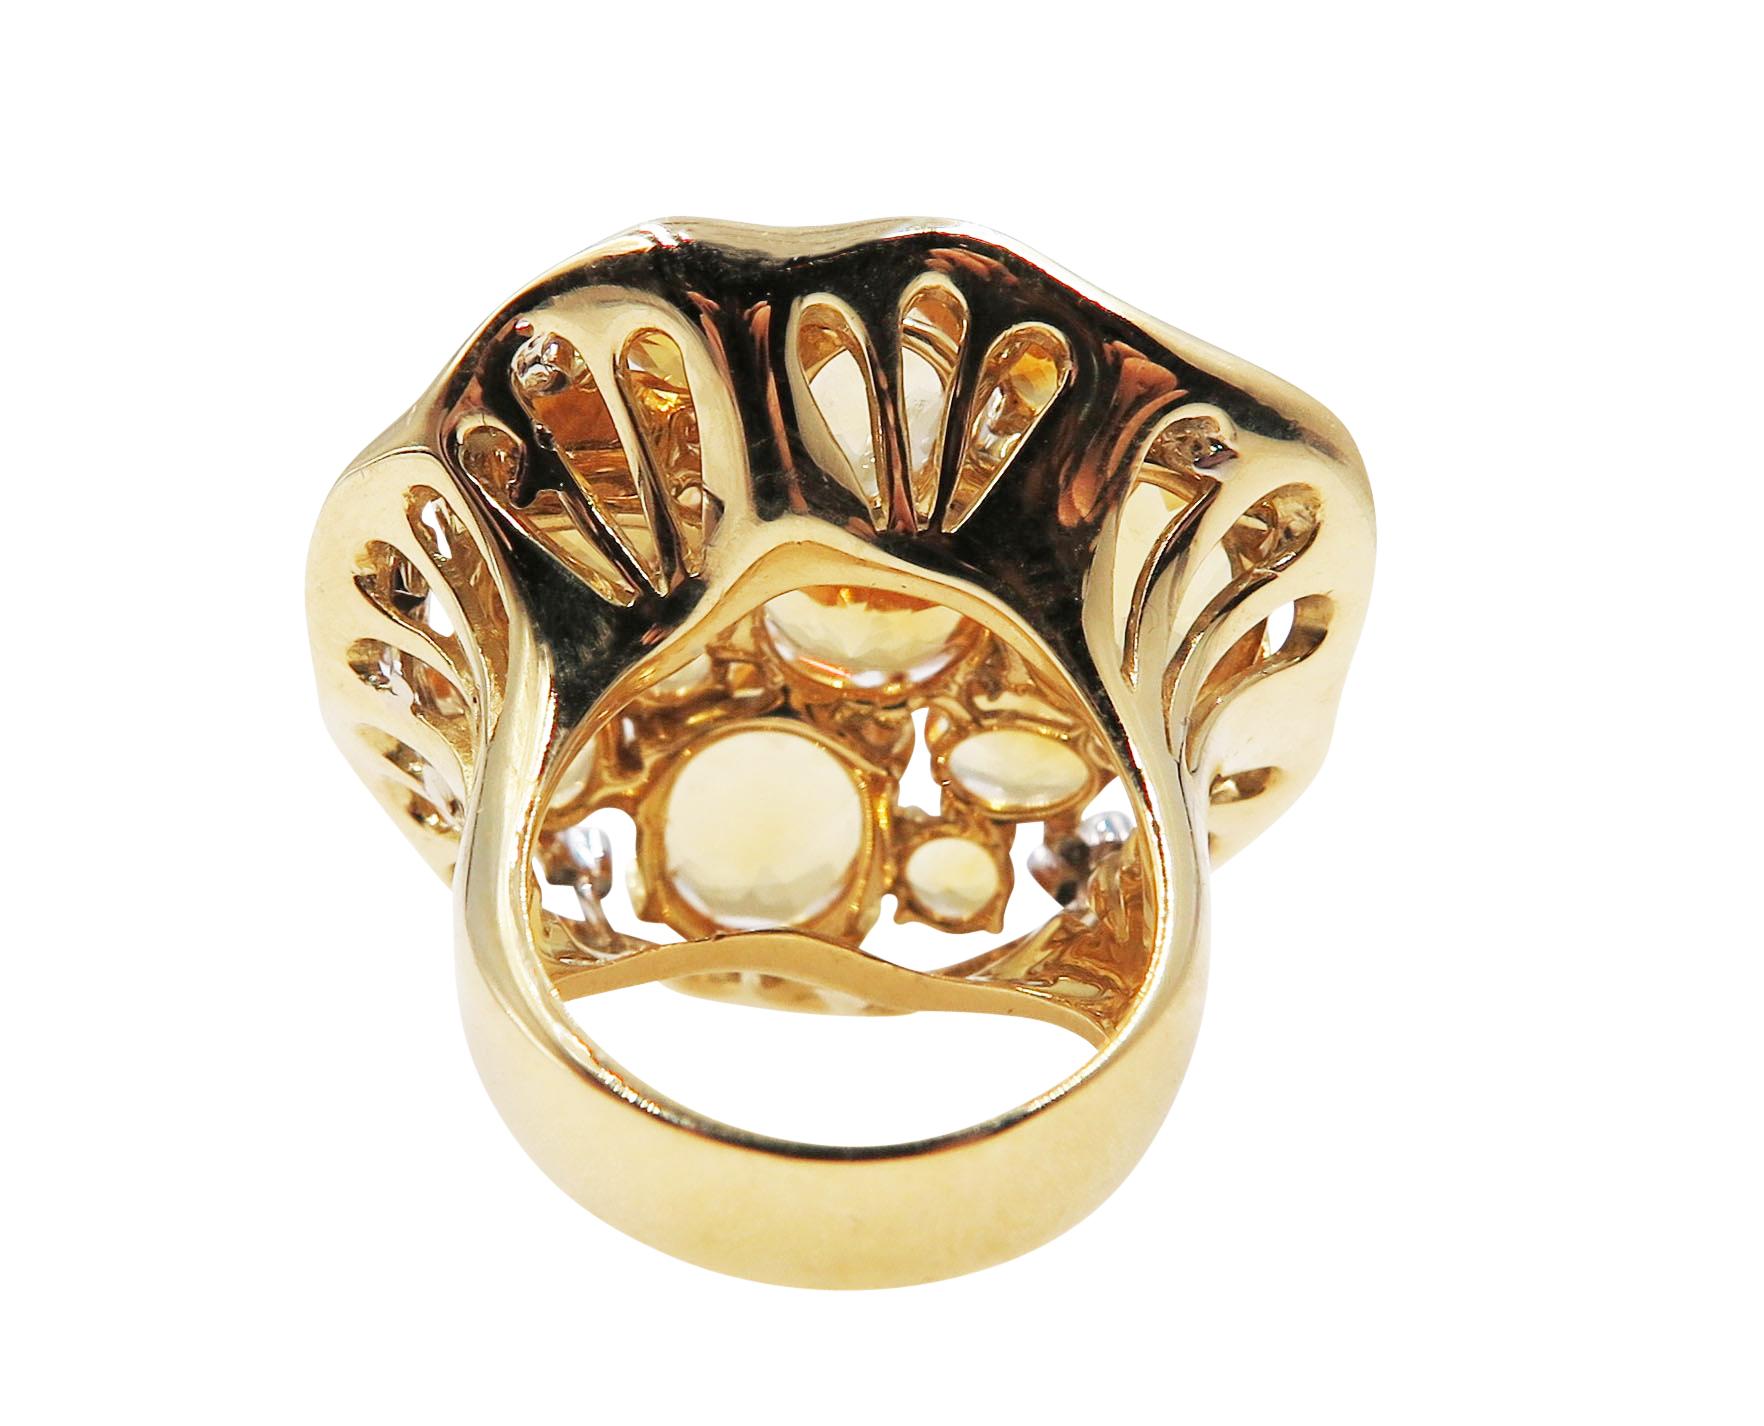 This Beautifully made Fashion Ring features 25,5 carat of Citrine, 0.34 carat Diamond set in 18k yellow gold.